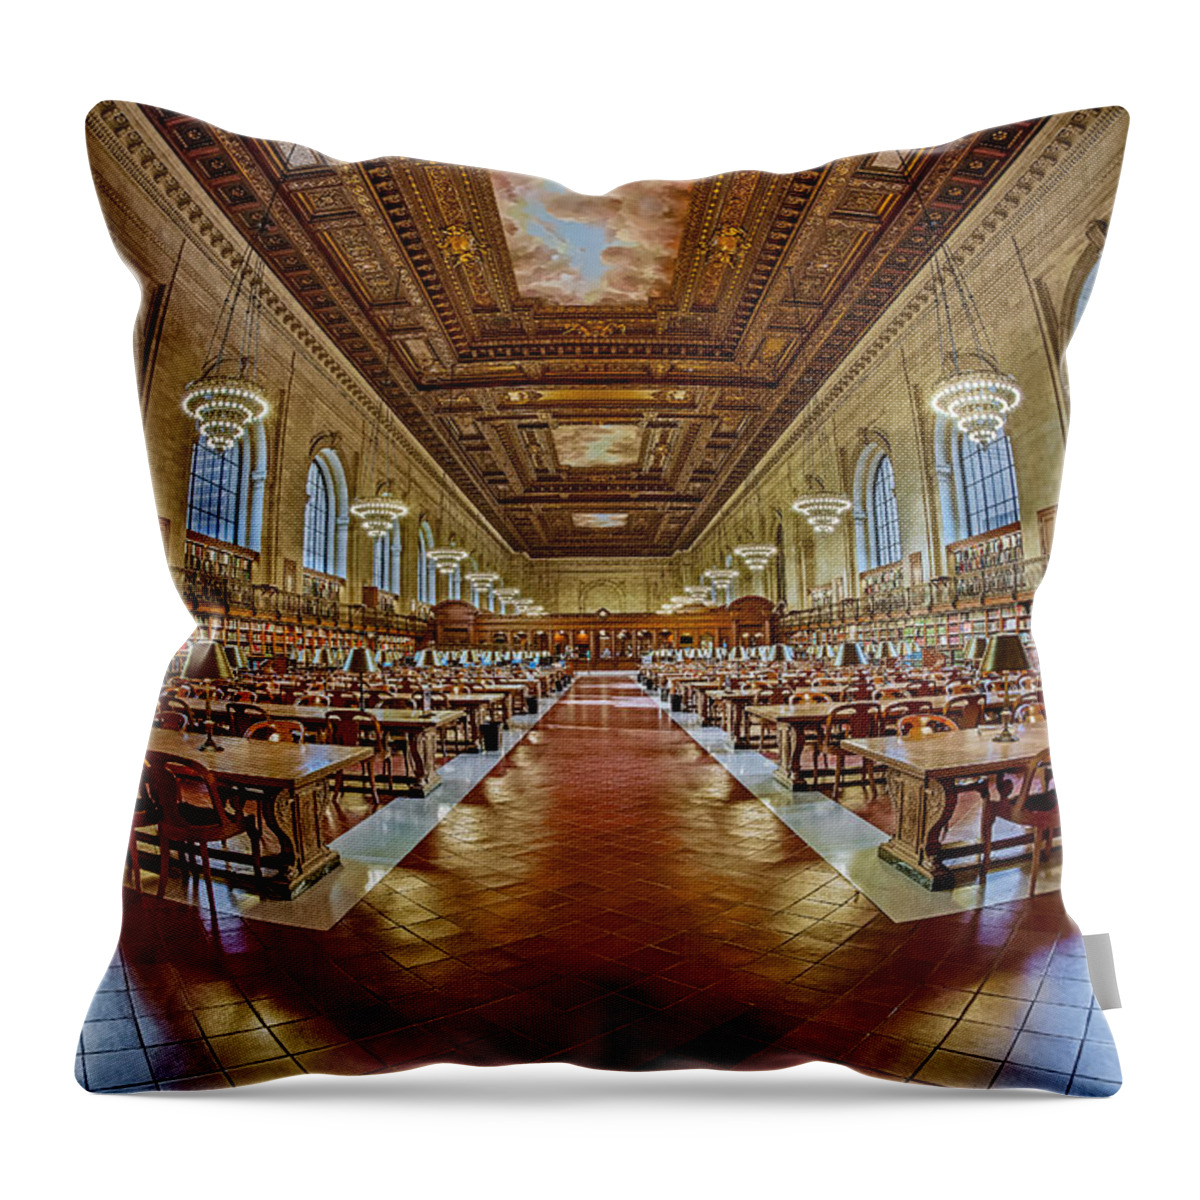 New York Public Library Throw Pillow featuring the photograph The Rose Main Reading Room NYPL by Susan Candelario